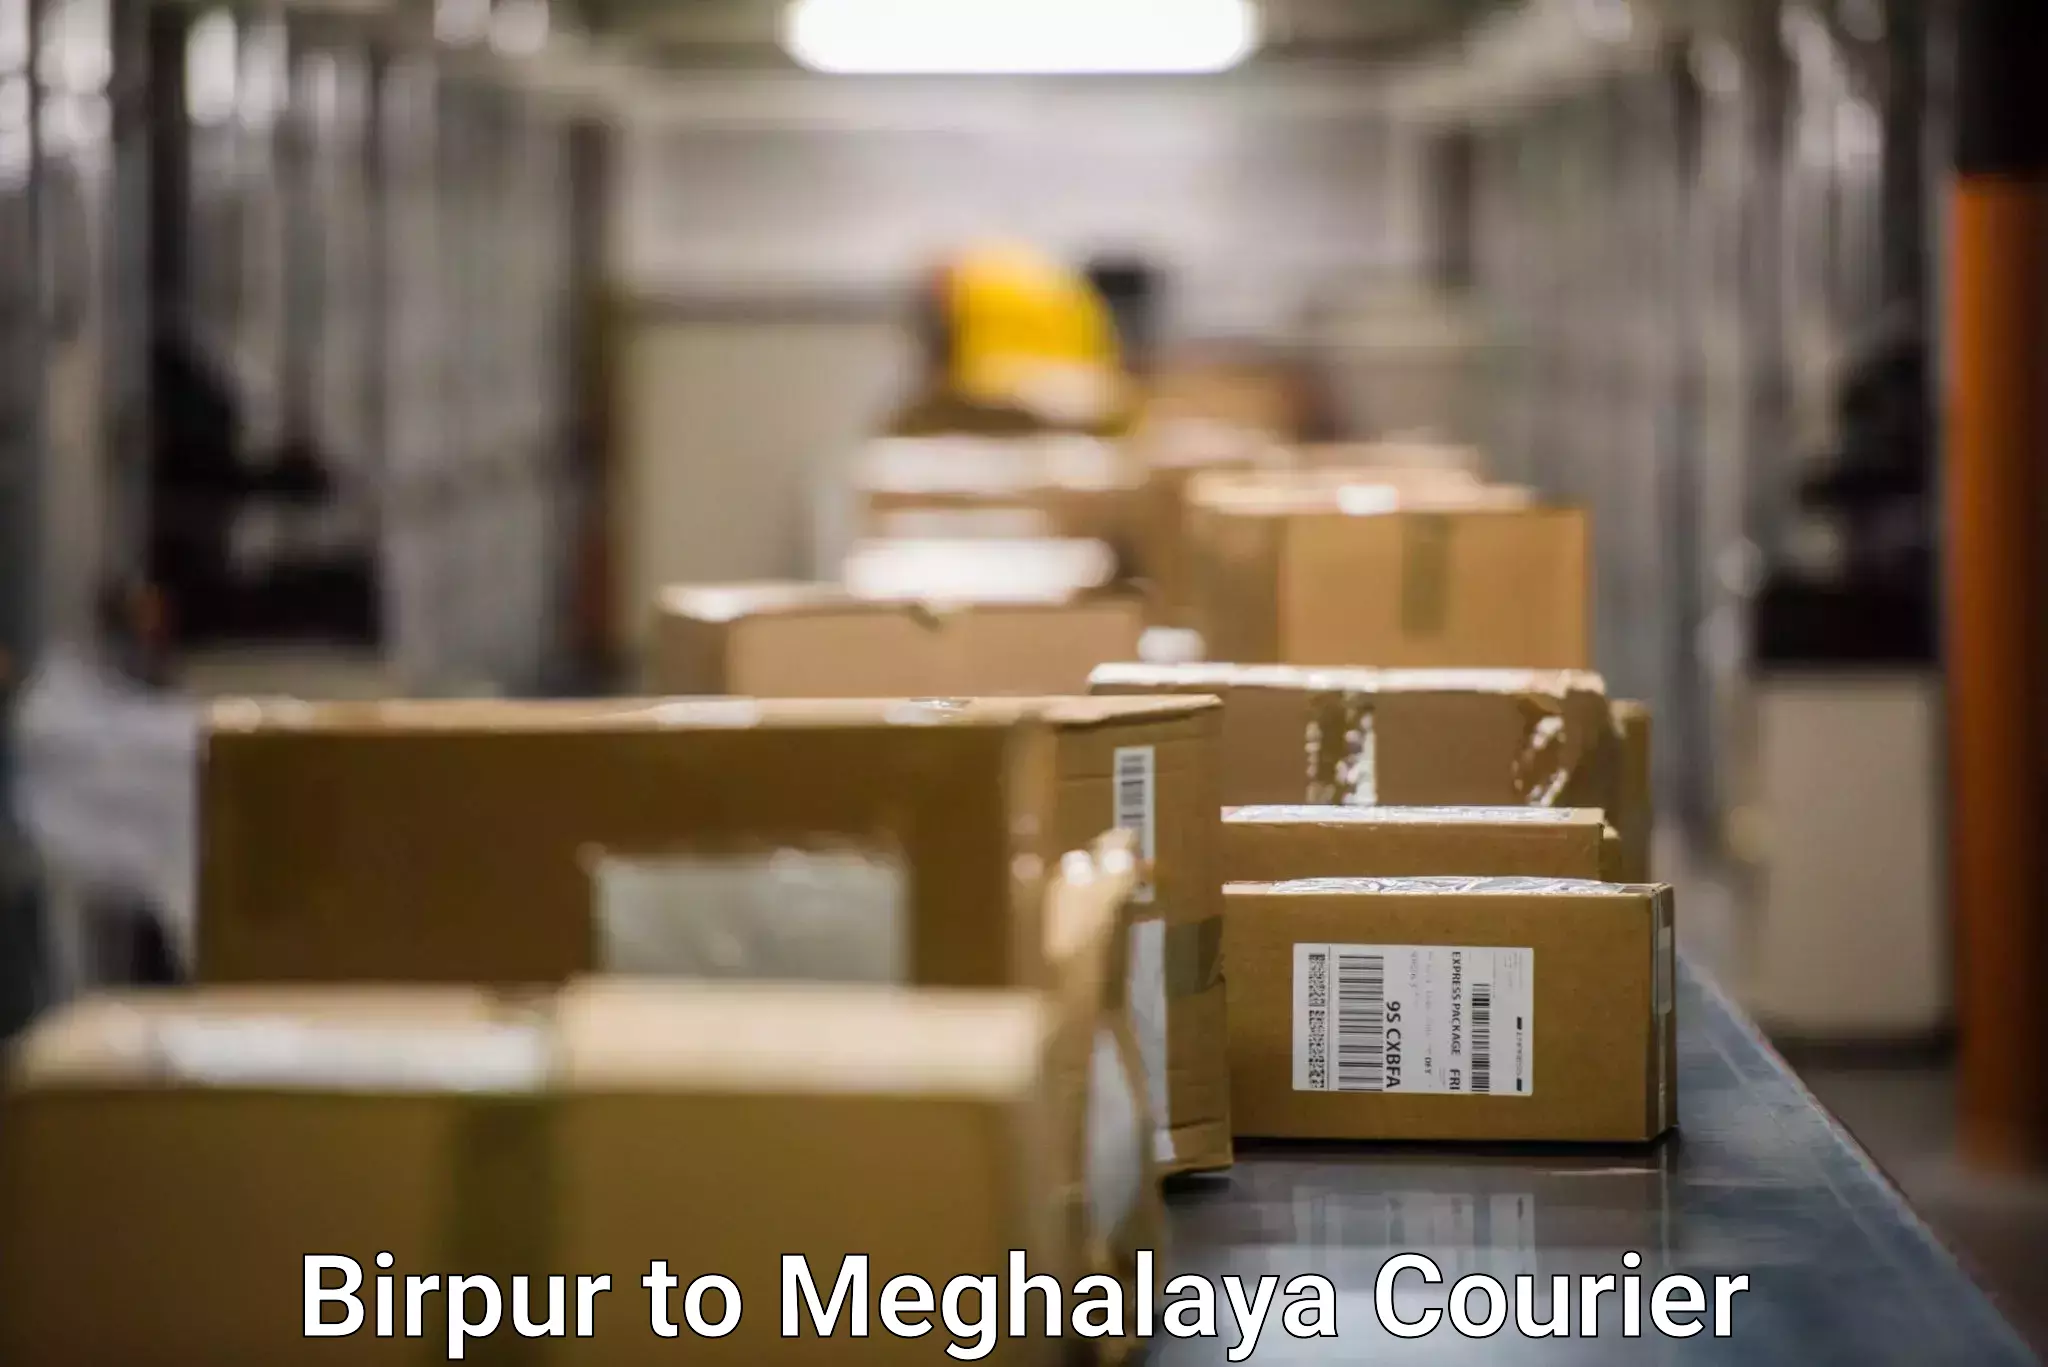 Reliable delivery network Birpur to Meghalaya